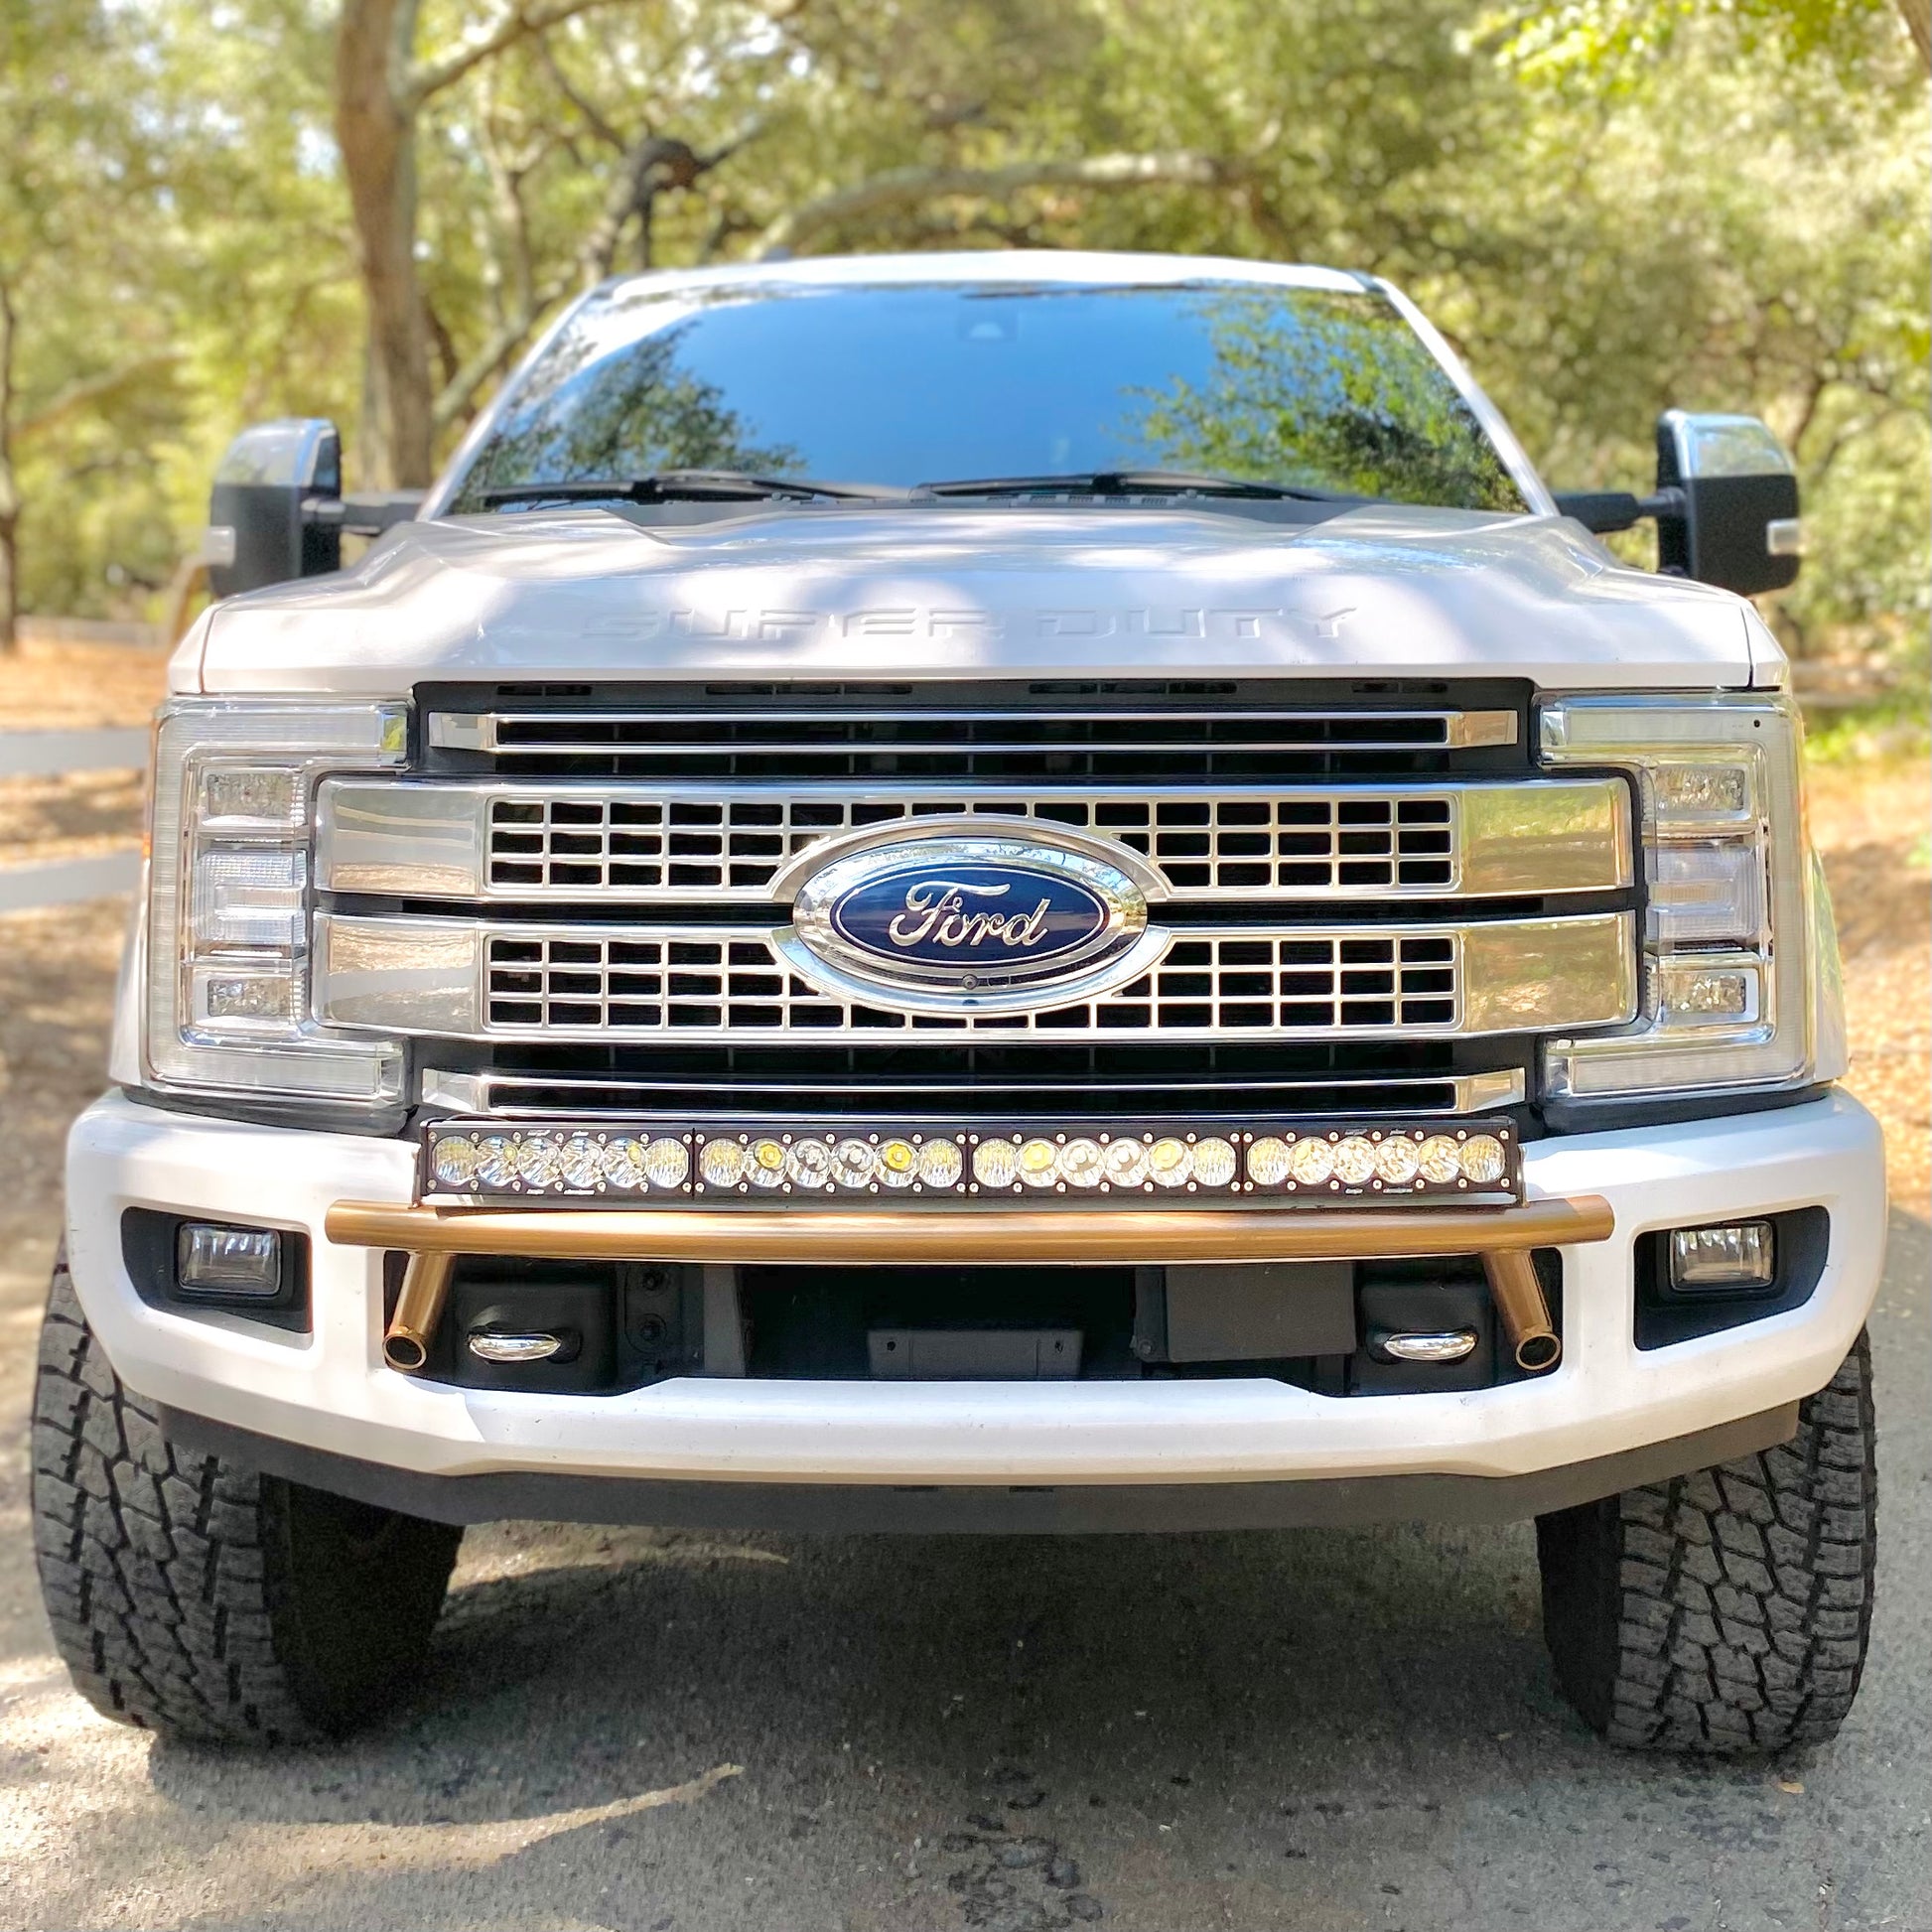 2017 - 2023 Ford Super Duty Light Mount - The Low Pro Series featuring a  Baja Designs 40 Curved OnX6 Arc Mount Tabs